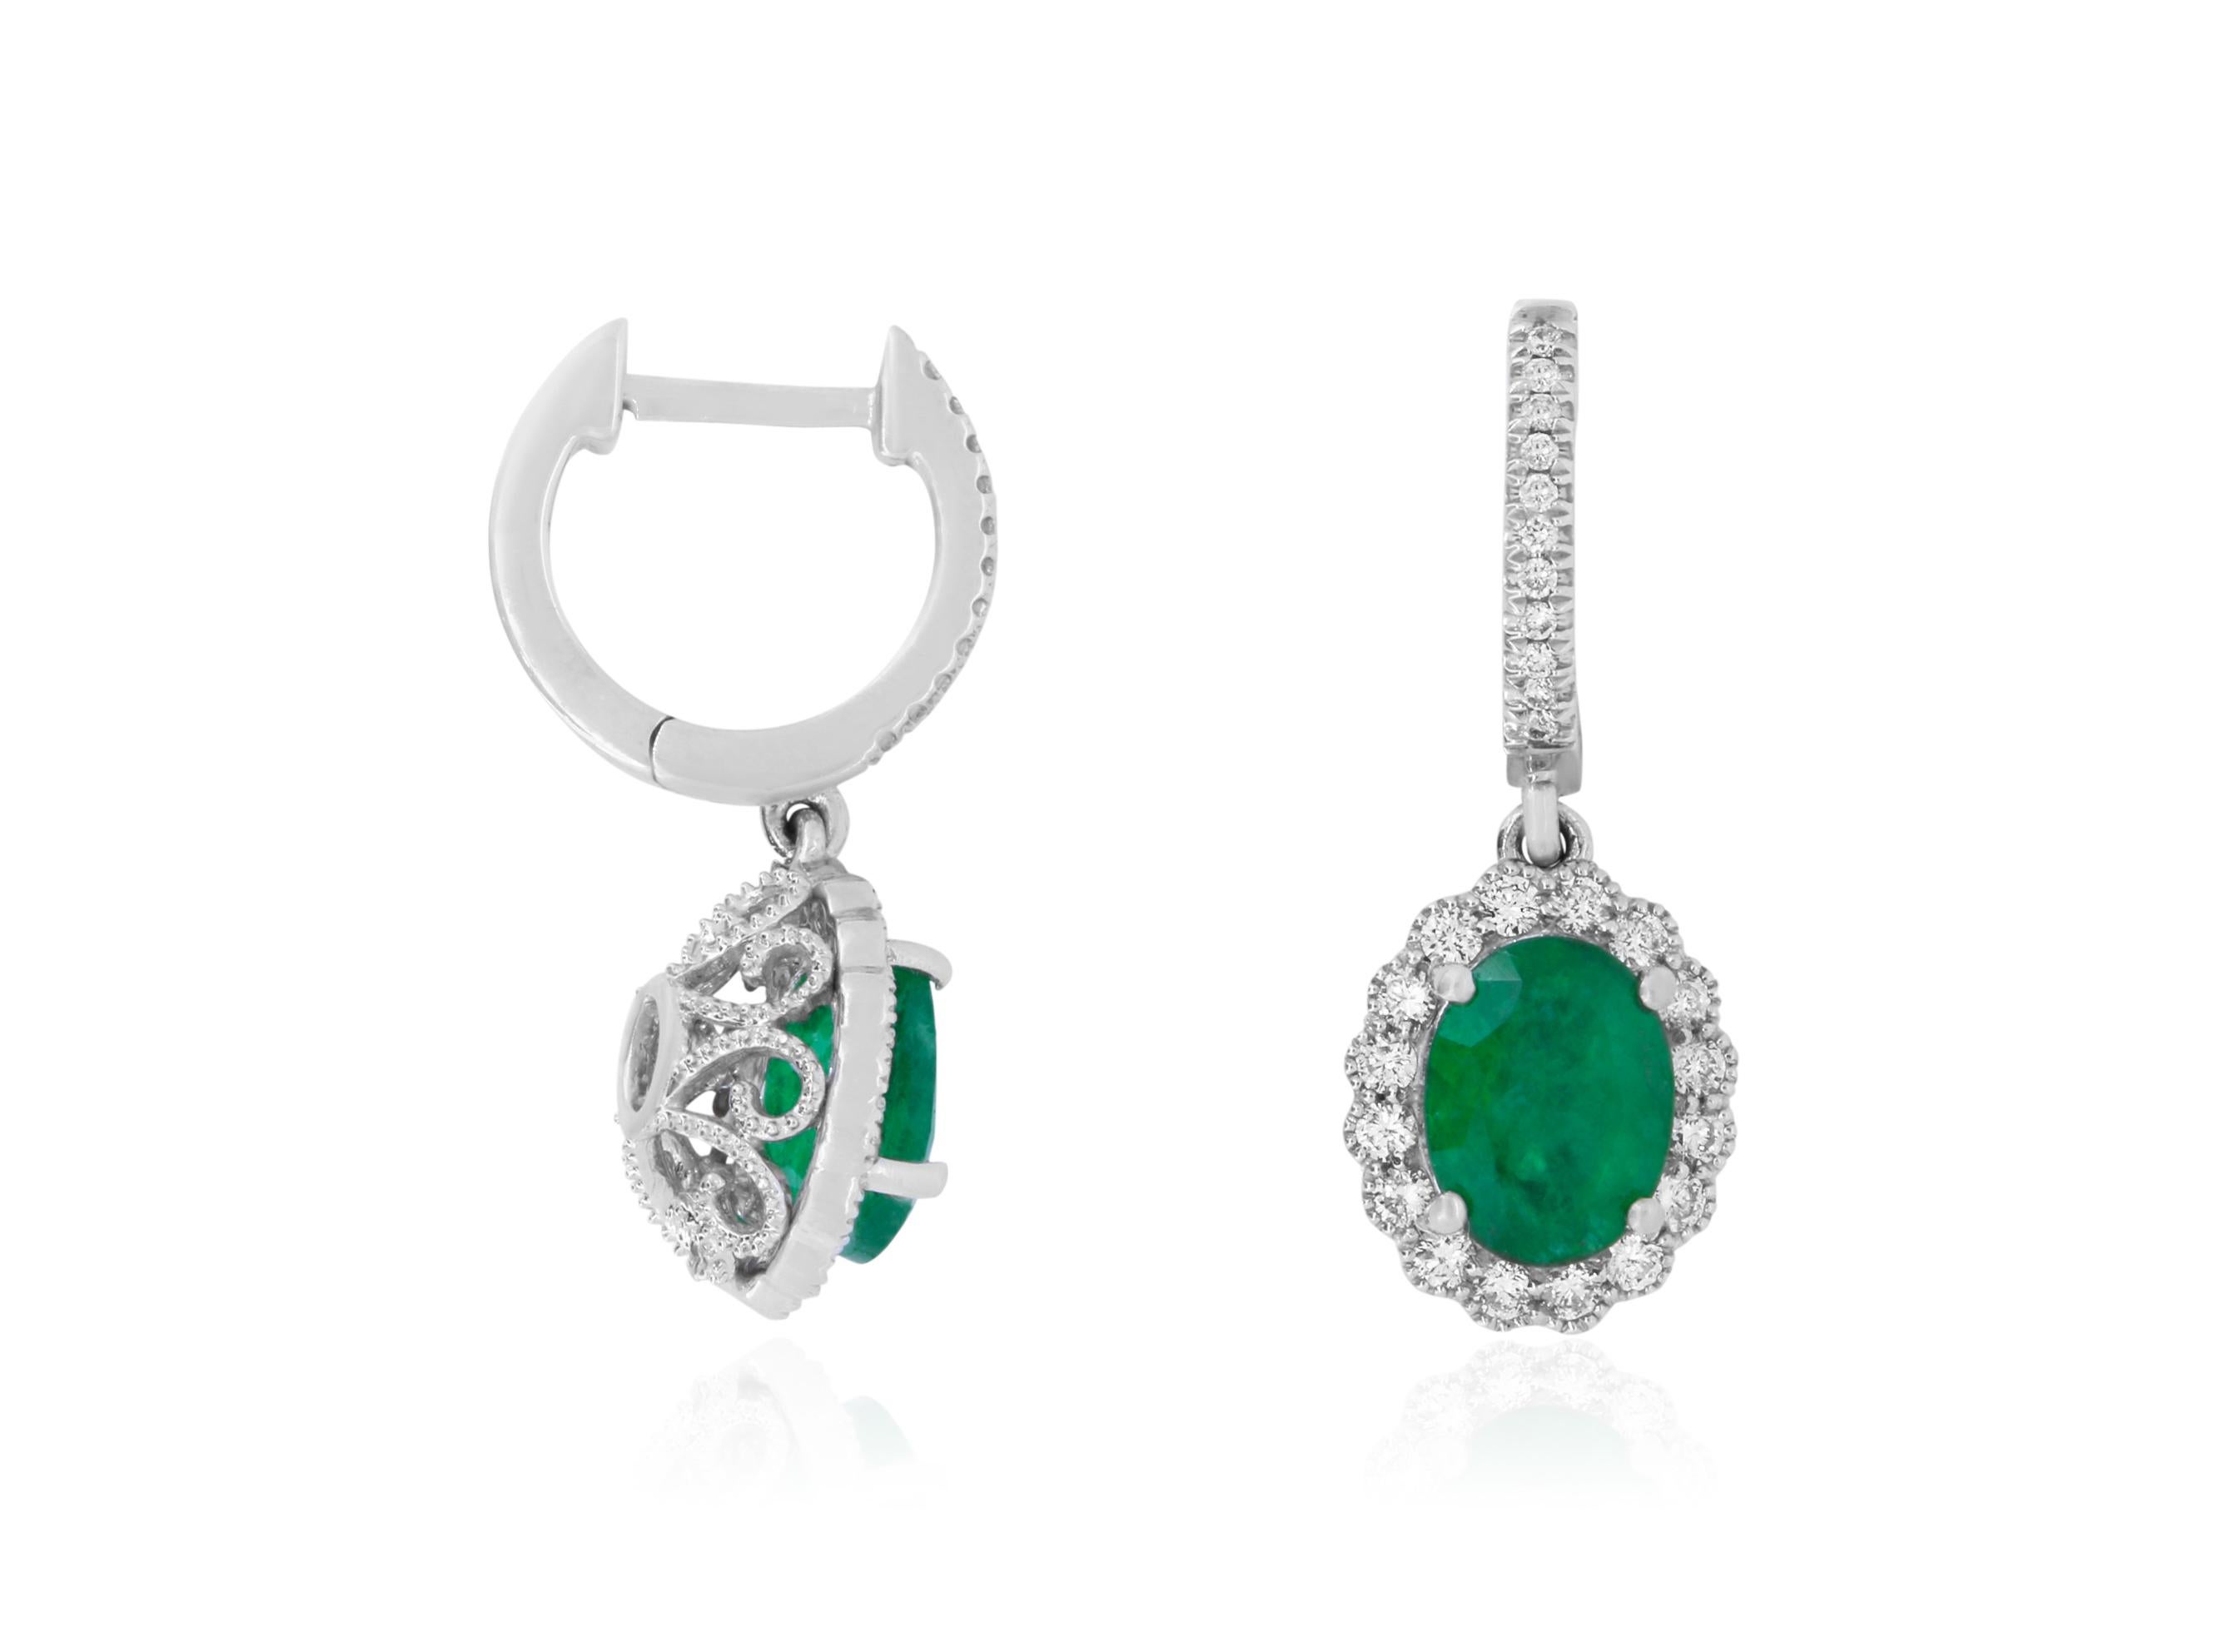 Material: 18k White Gold 
Stone Details: 2 Oval Shaped Emeralds at 2.37 Carats Total
Mounting Stone Details: 54 Brilliant Round White Diamonds at 0.55 Carats- Clarity: SI / Color: H-I

Fine one-of-a-kind craftsmanship meets incredible quality in